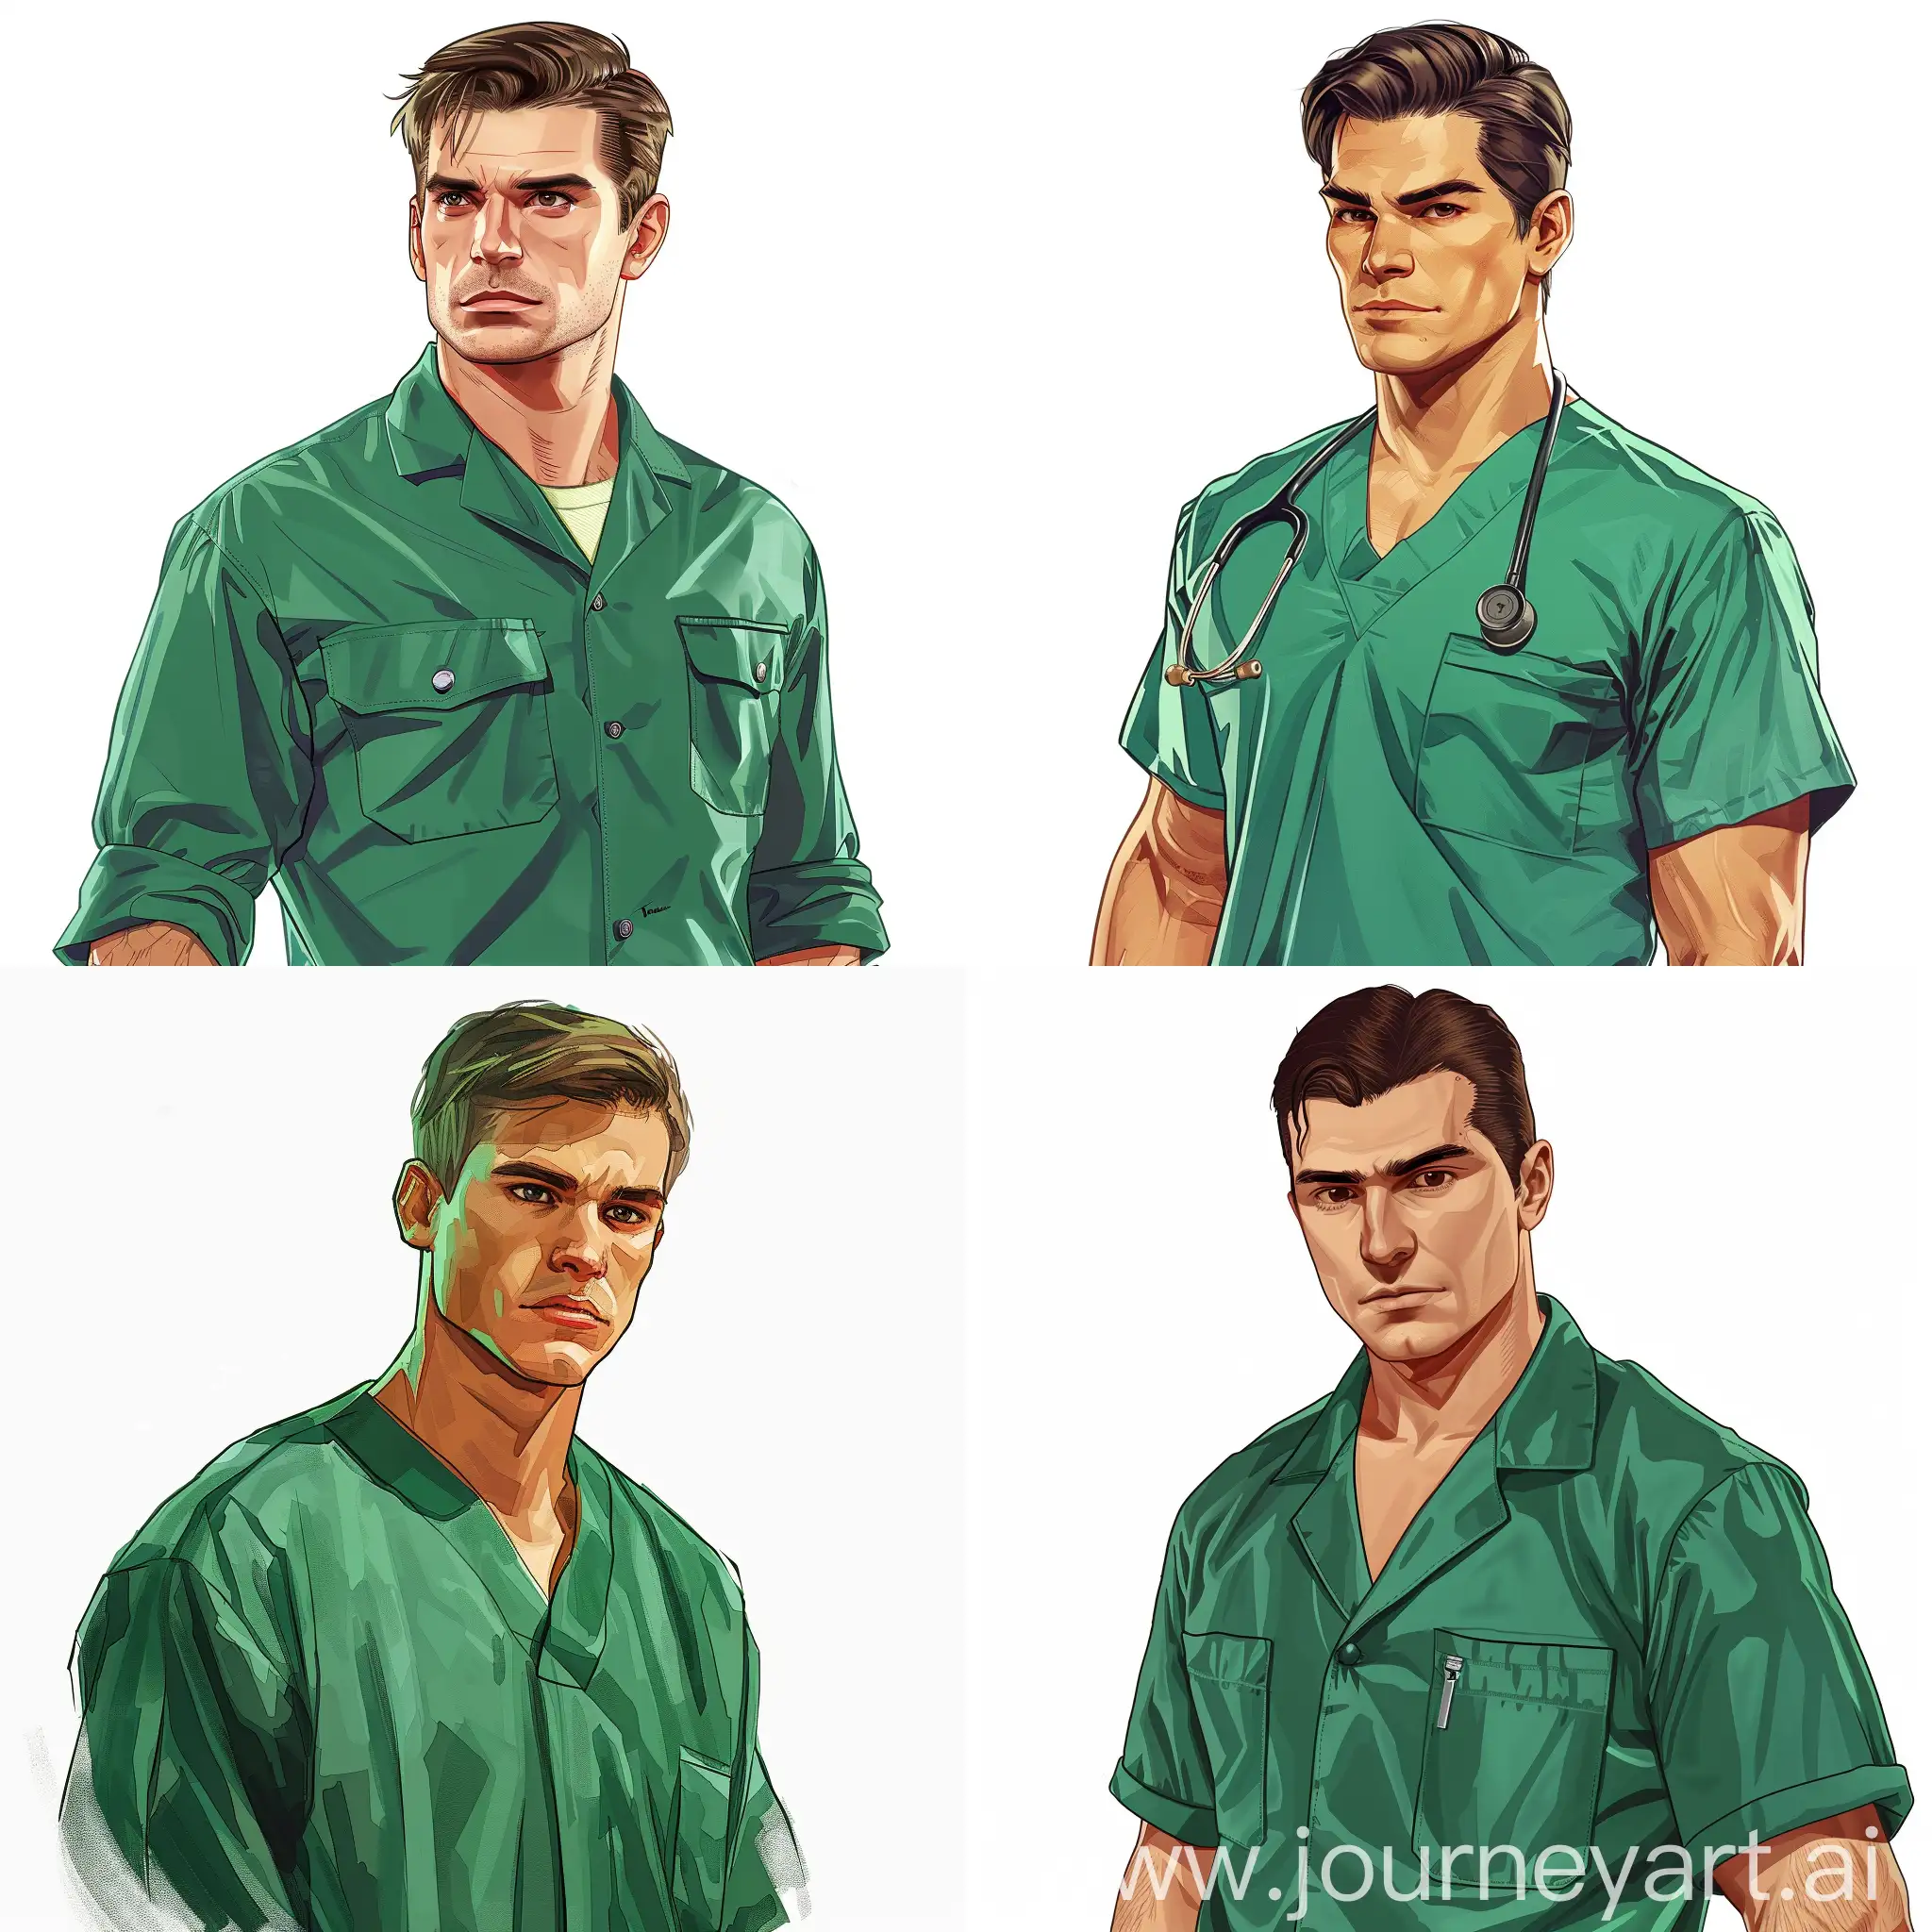 Draw a handsome young doctor in a green uniform in the style of the GTA 5 computer game. The background is white